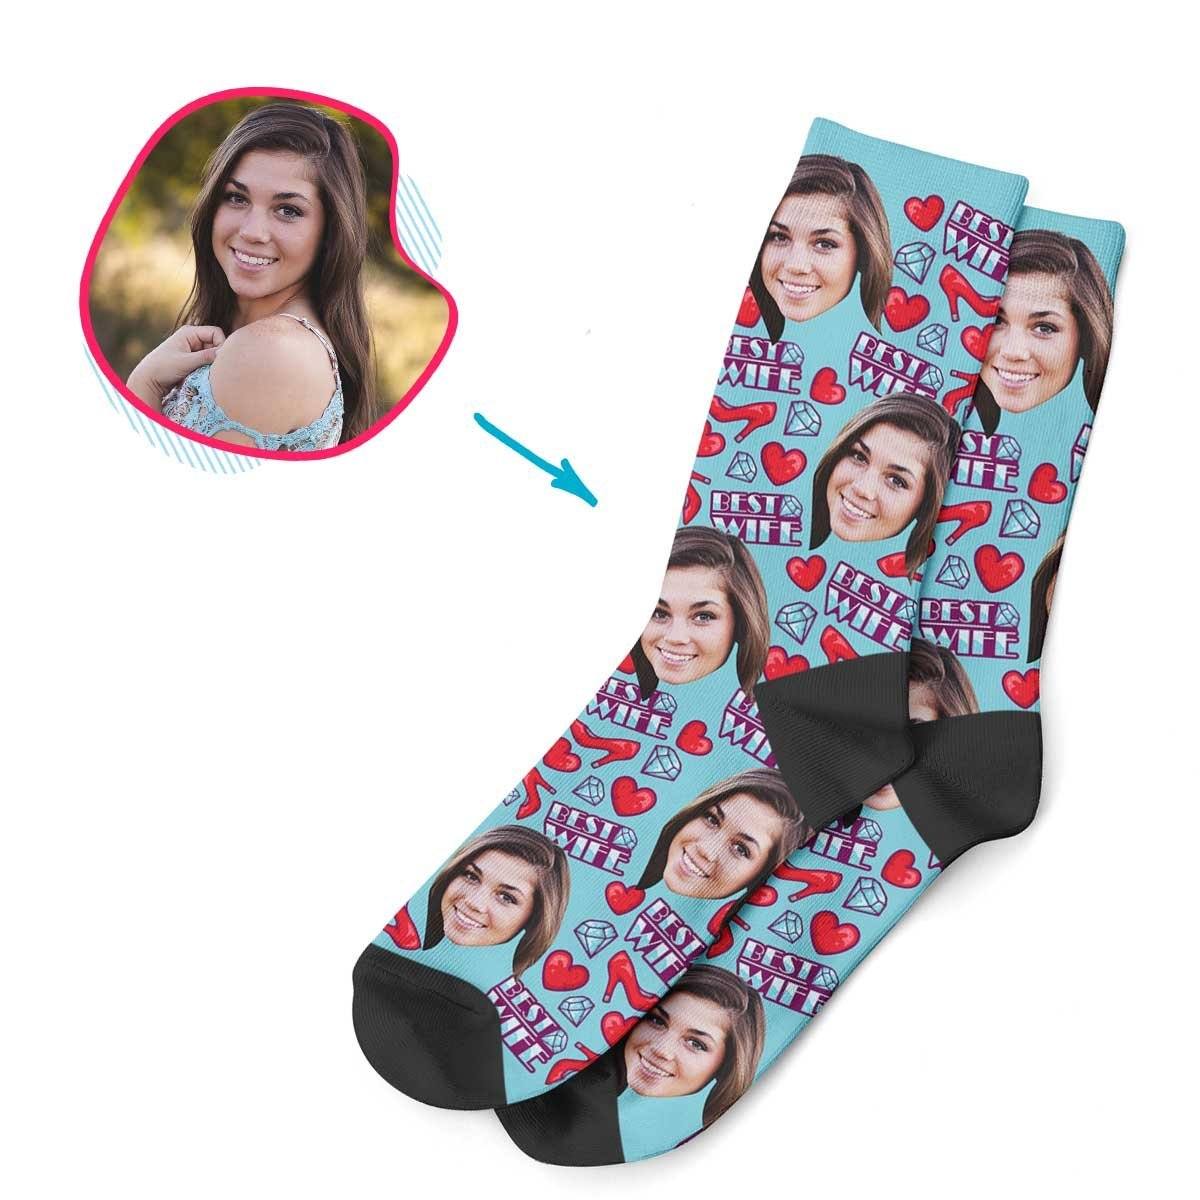 Blue Wife personalized socks with photo of face printed on them